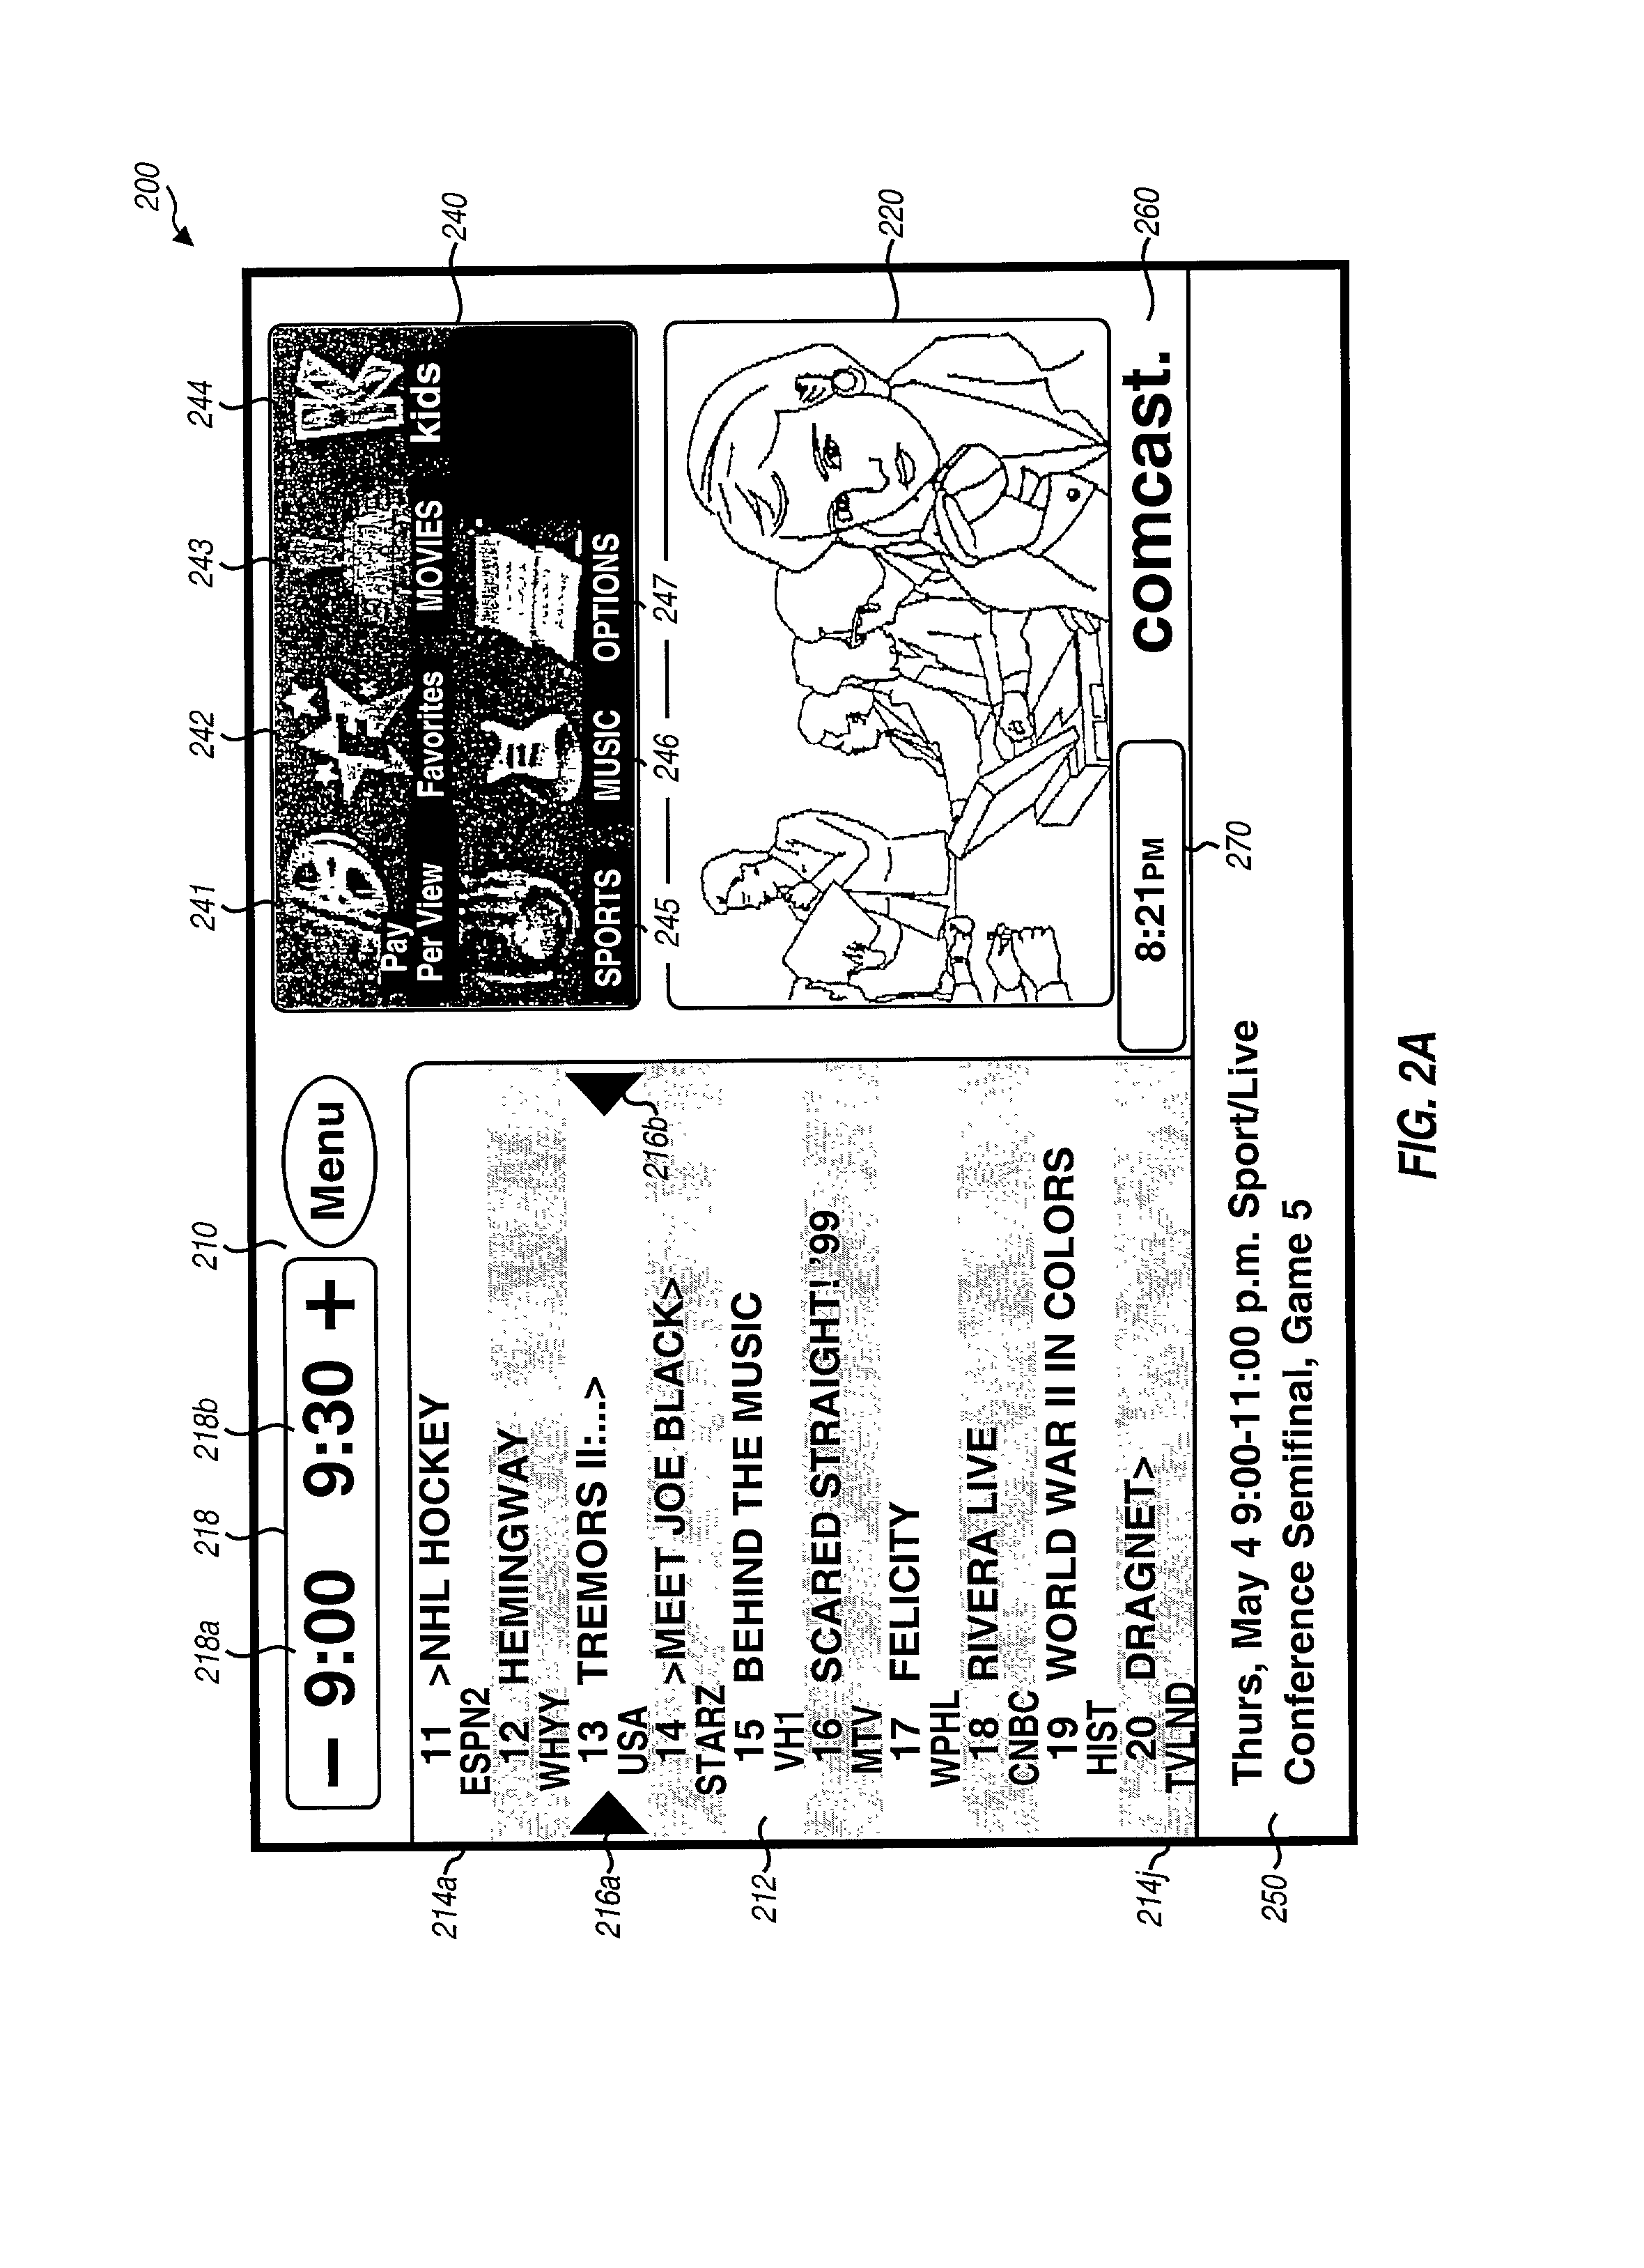 Method and apparatus for collecting and reporting consumer trend data in an information distribution system